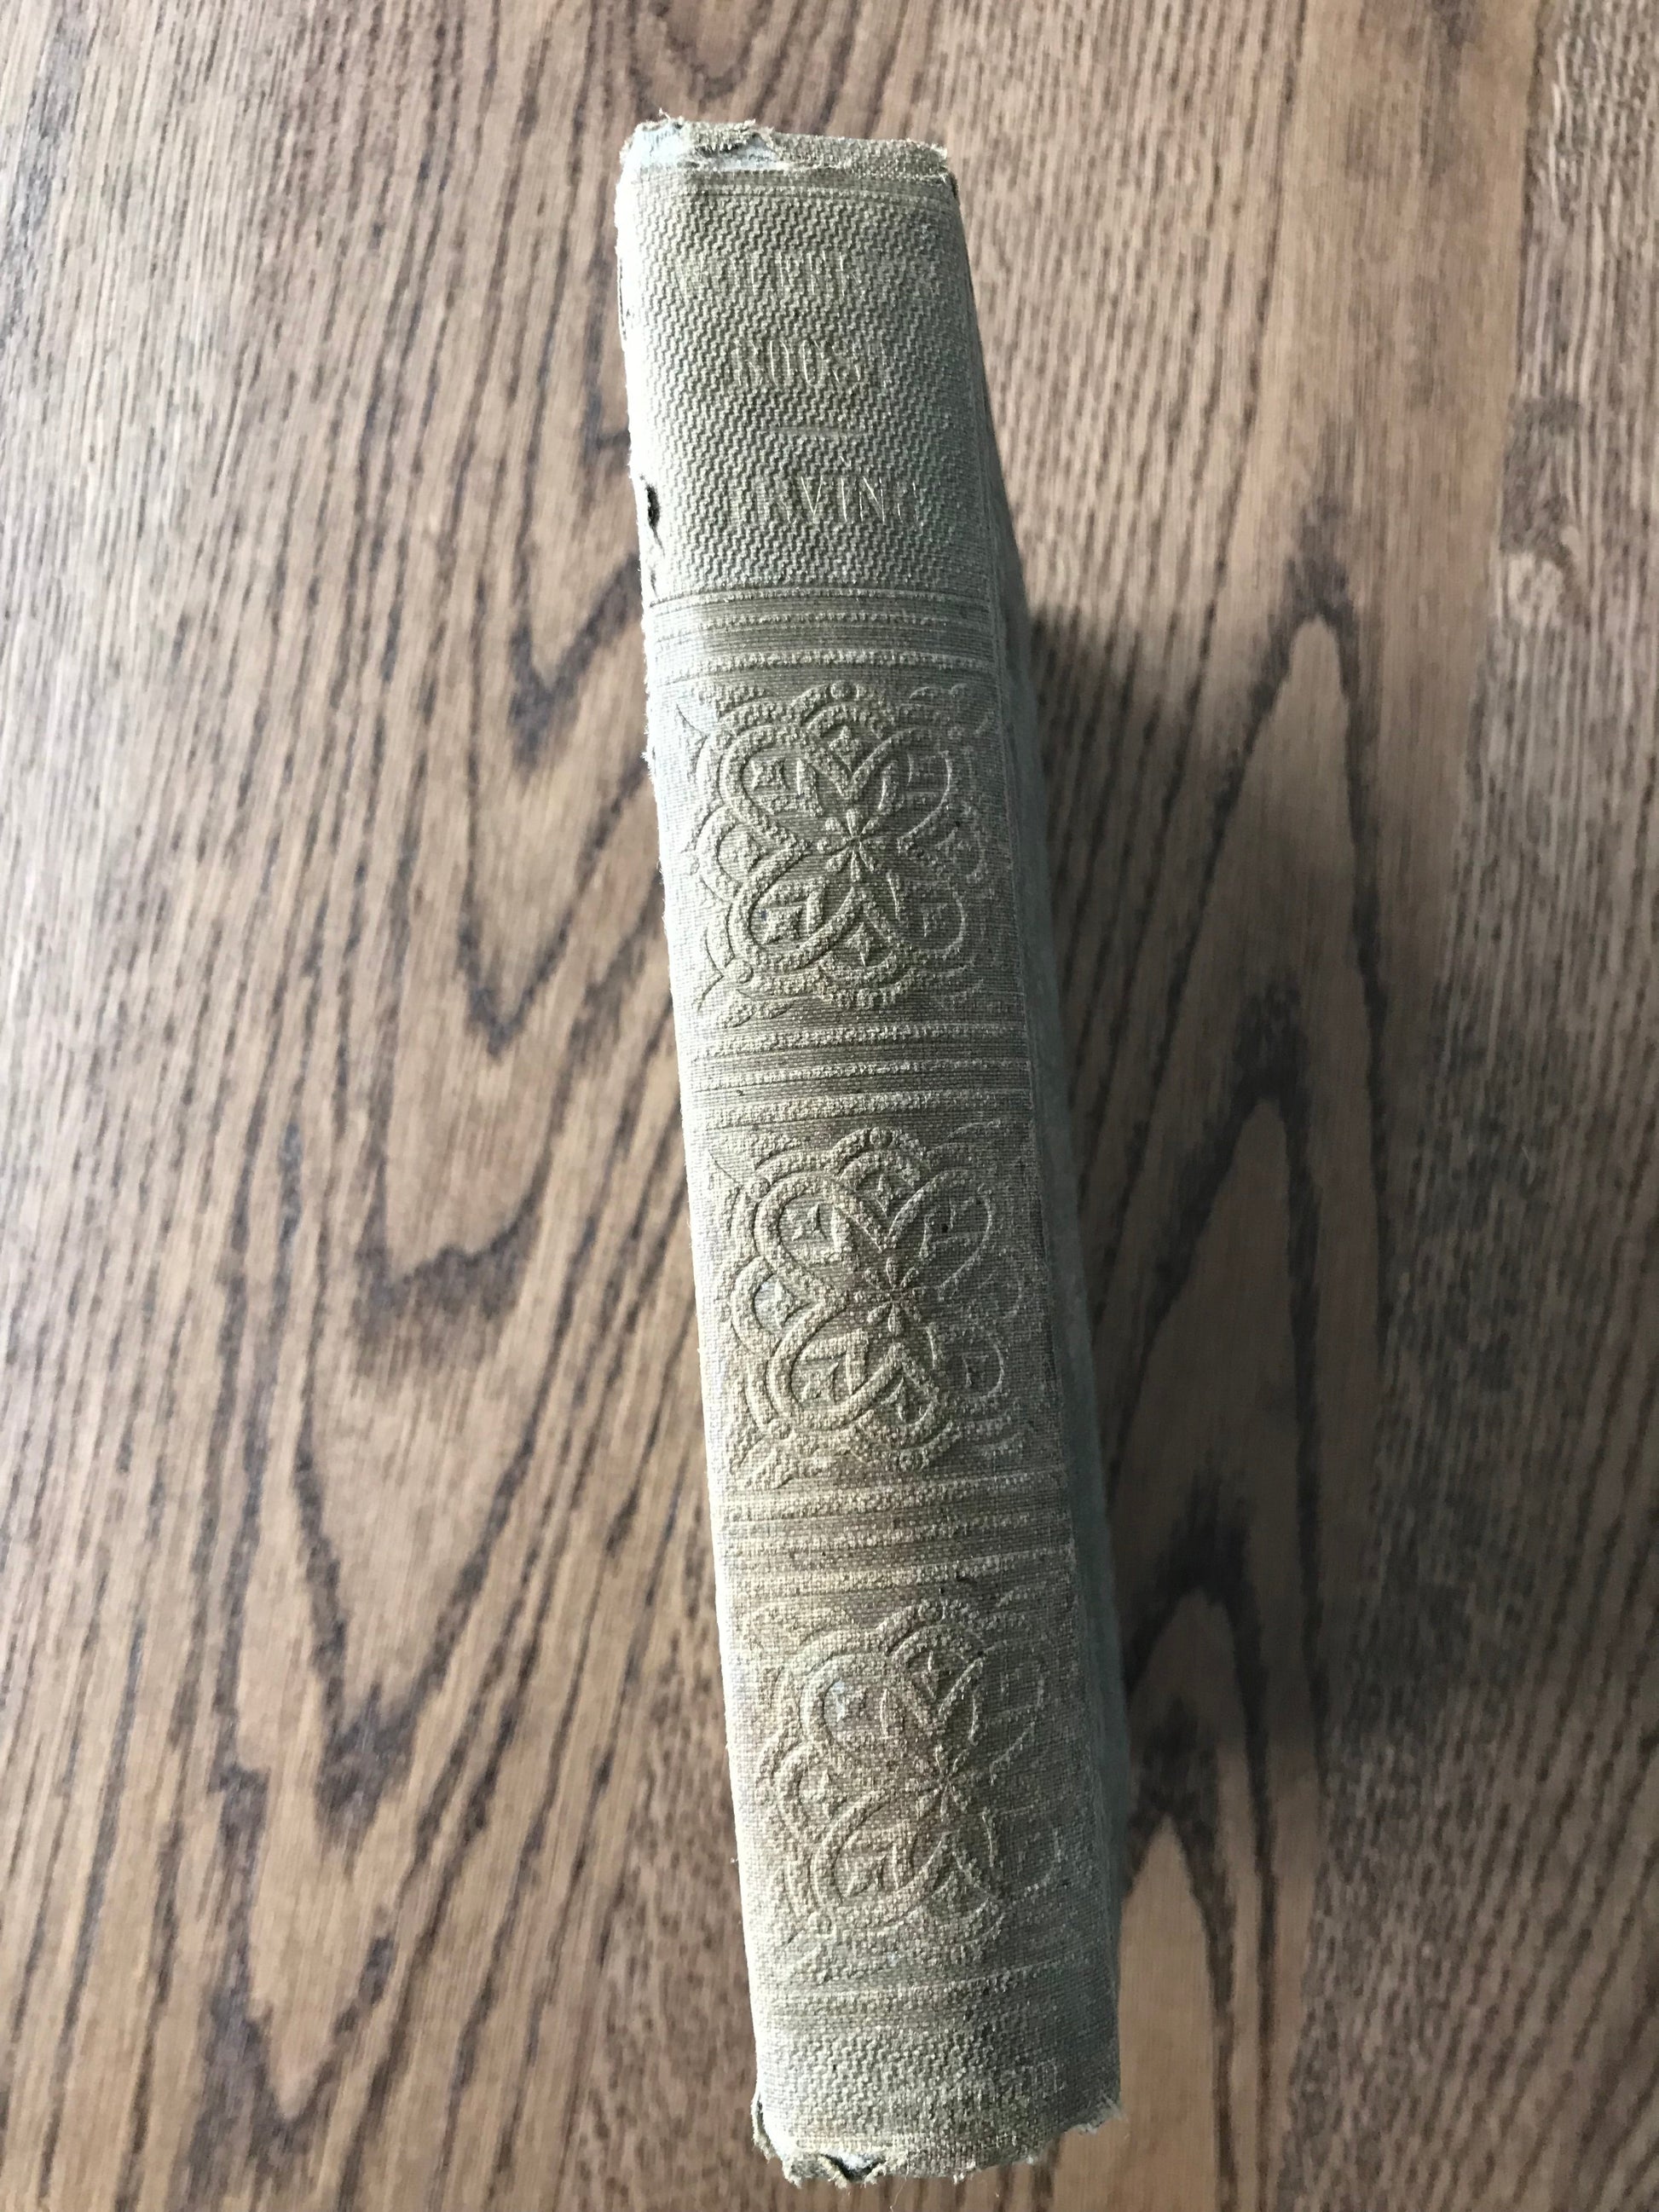 WOLFERT'S ROOST AND OTHER PAPERS, NOW FIRST COLLECTED -  WASHINGTON IRVING BooksCardsNBikes